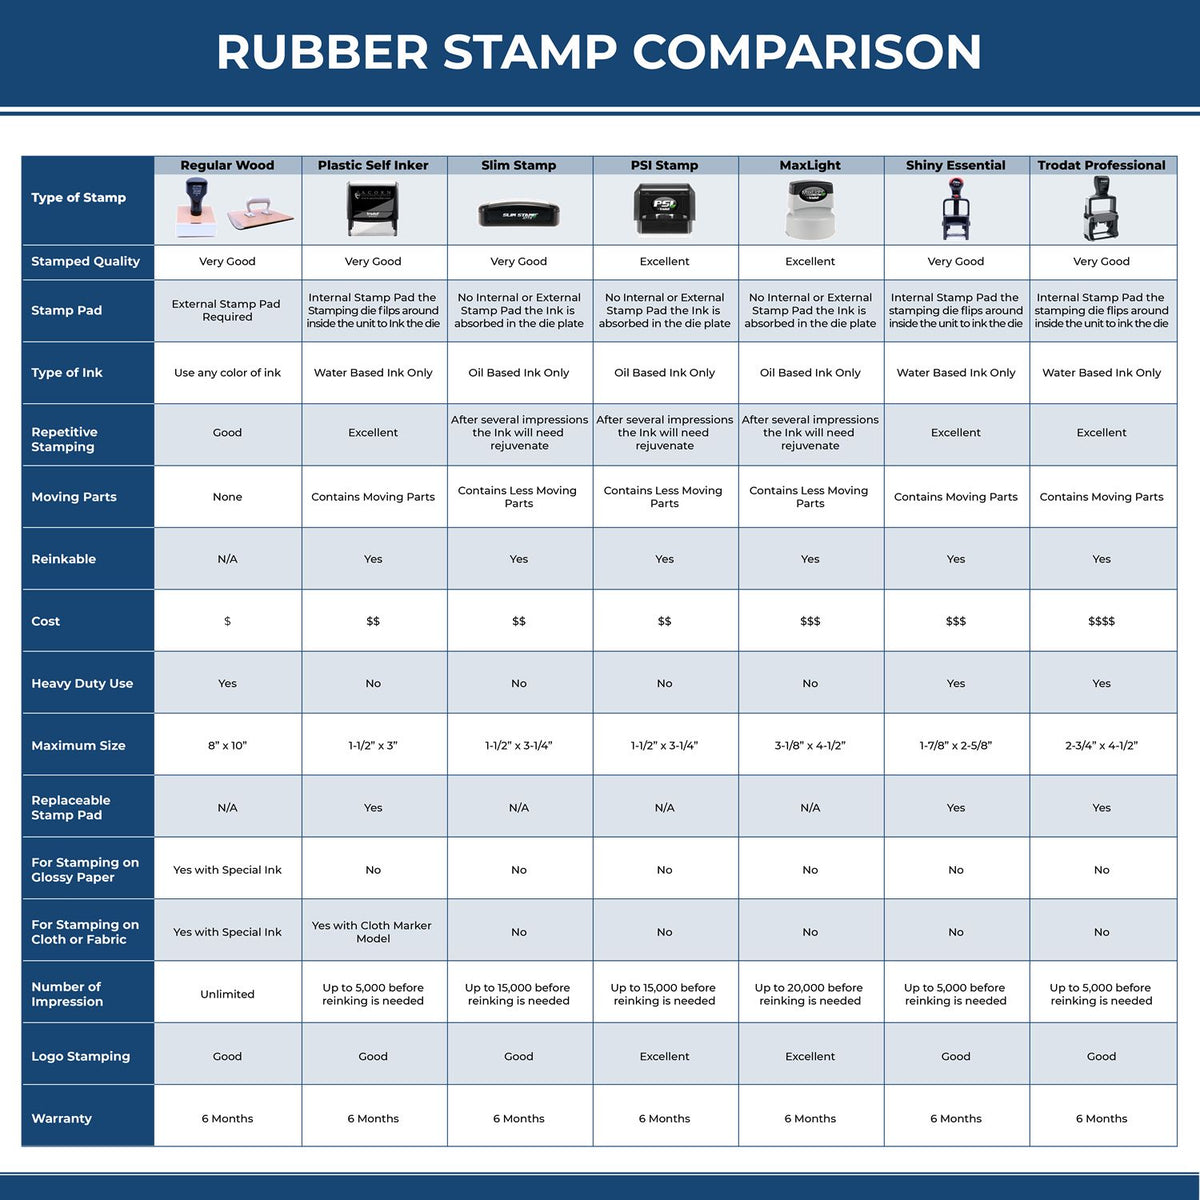 A comparison chart for the different types of mount models available for the Self-Inking Pennsylvania Landscape Architect Stamp.